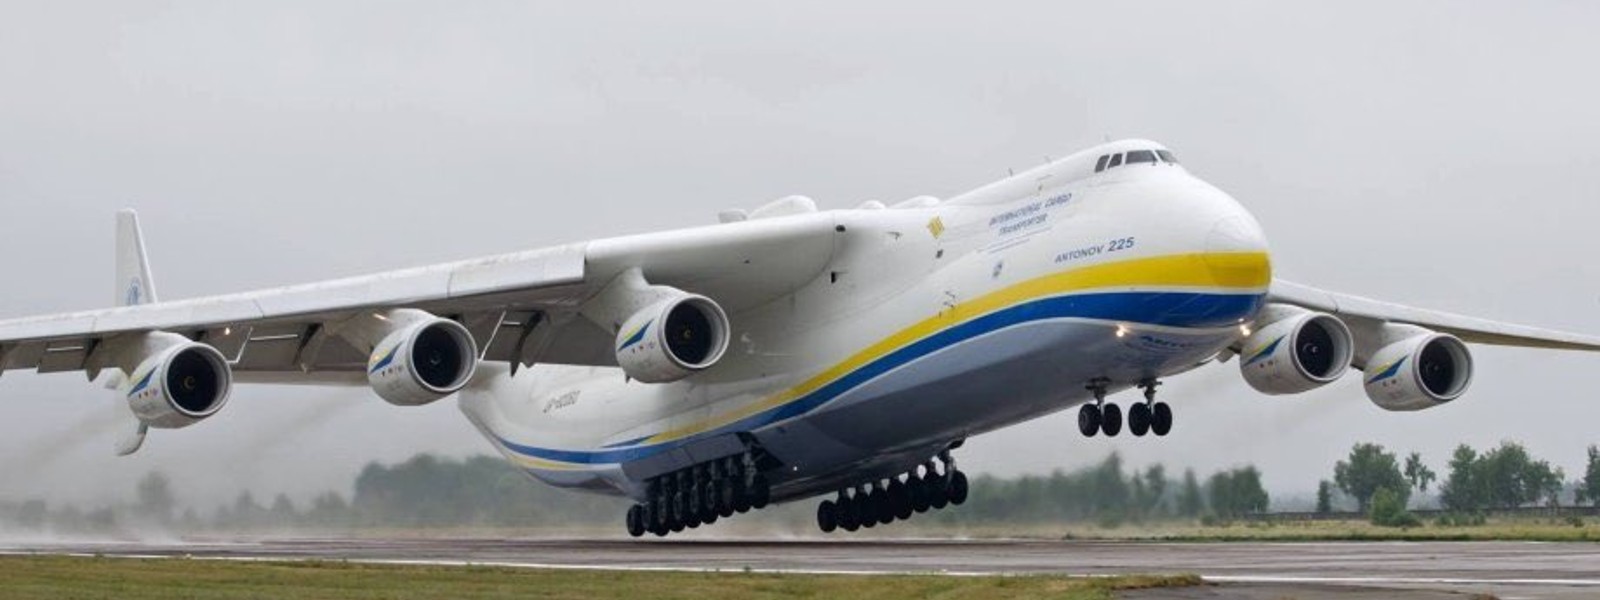 World's largest plane destroyed in Russian Attack